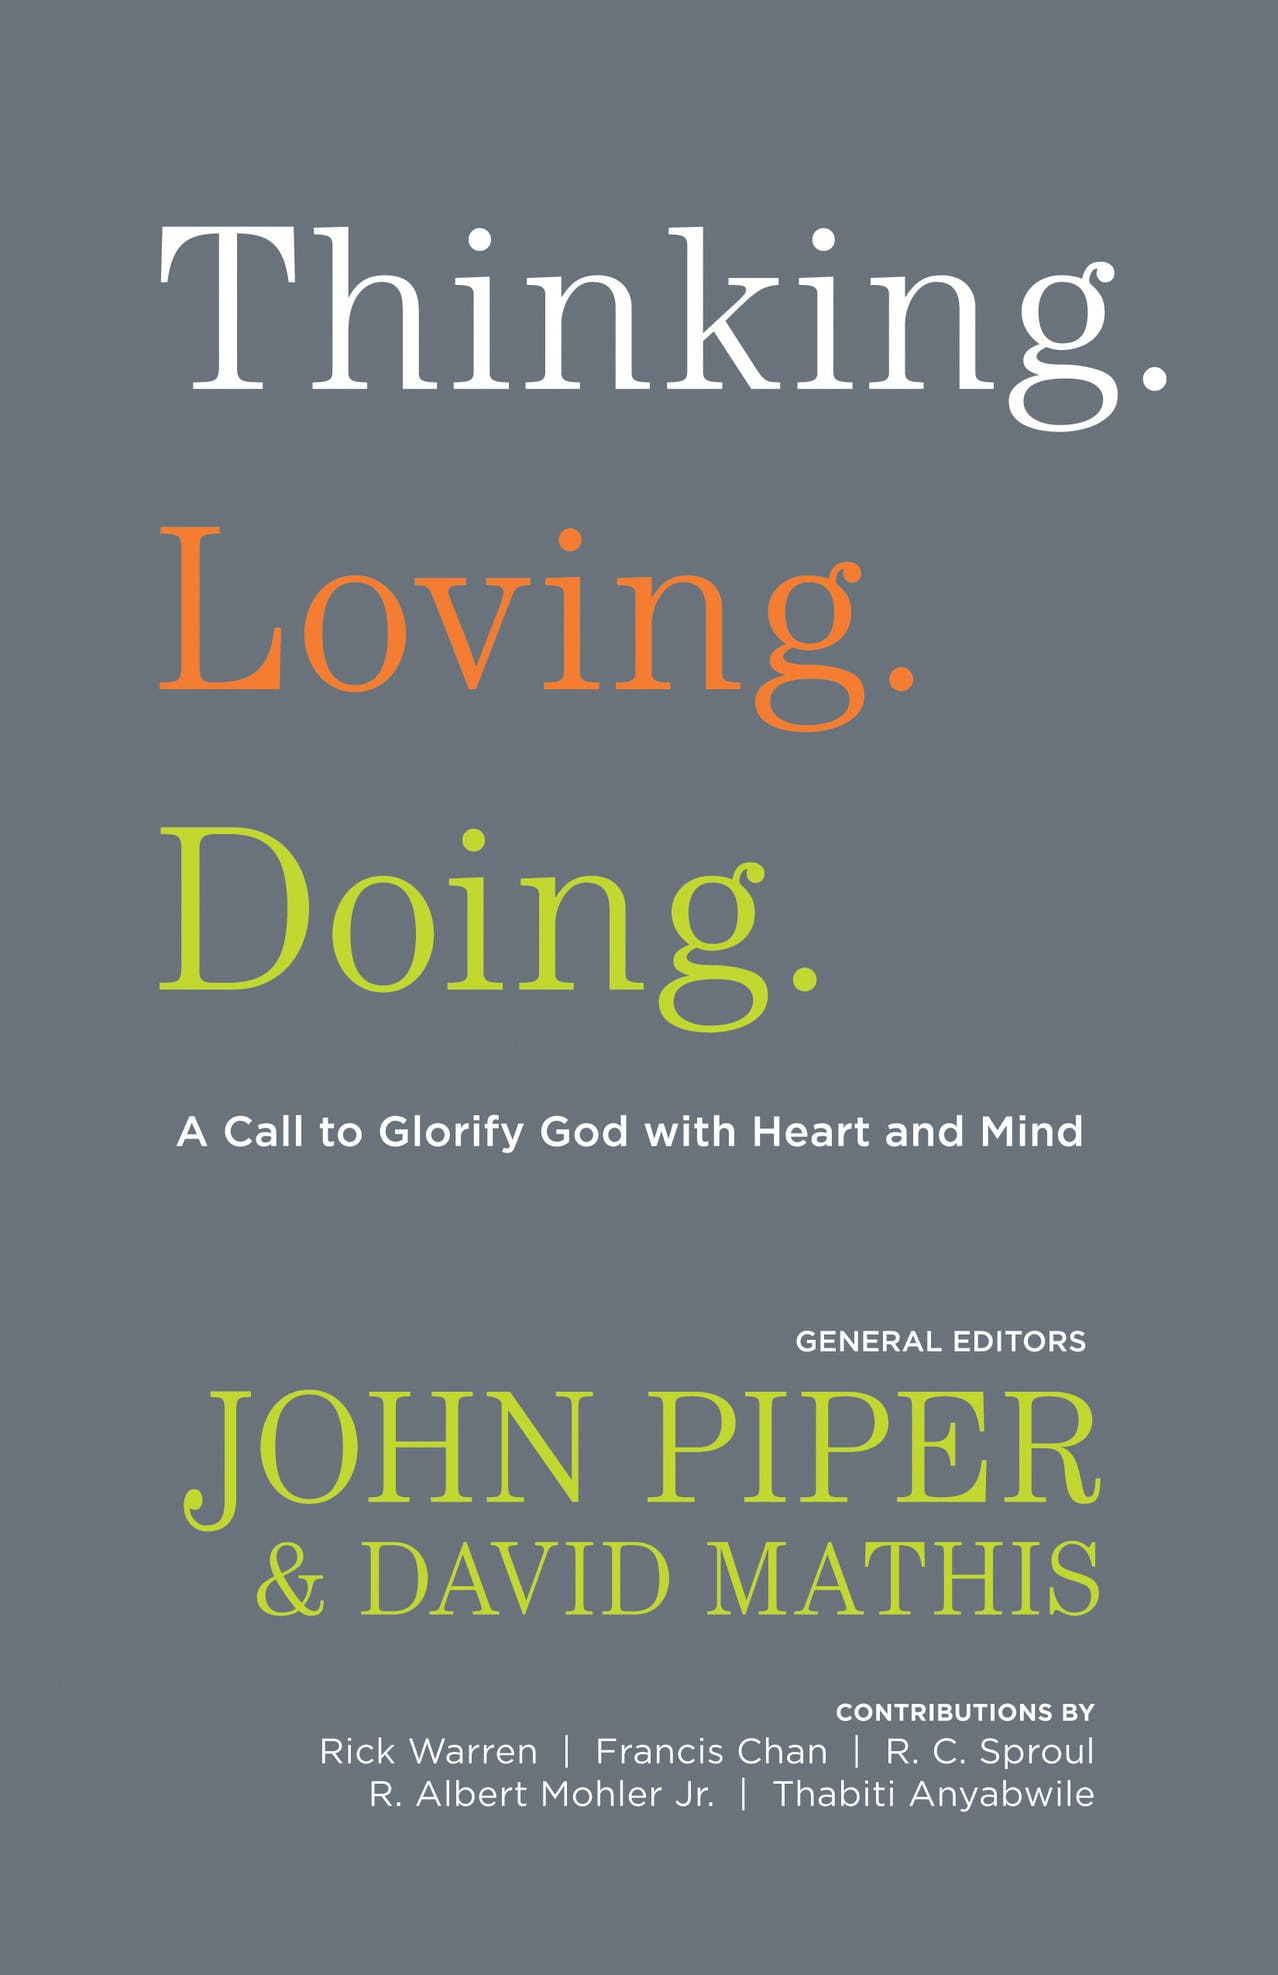 DOWNLOAD PDF: Thinking, Loving, Doing by John Piper 20